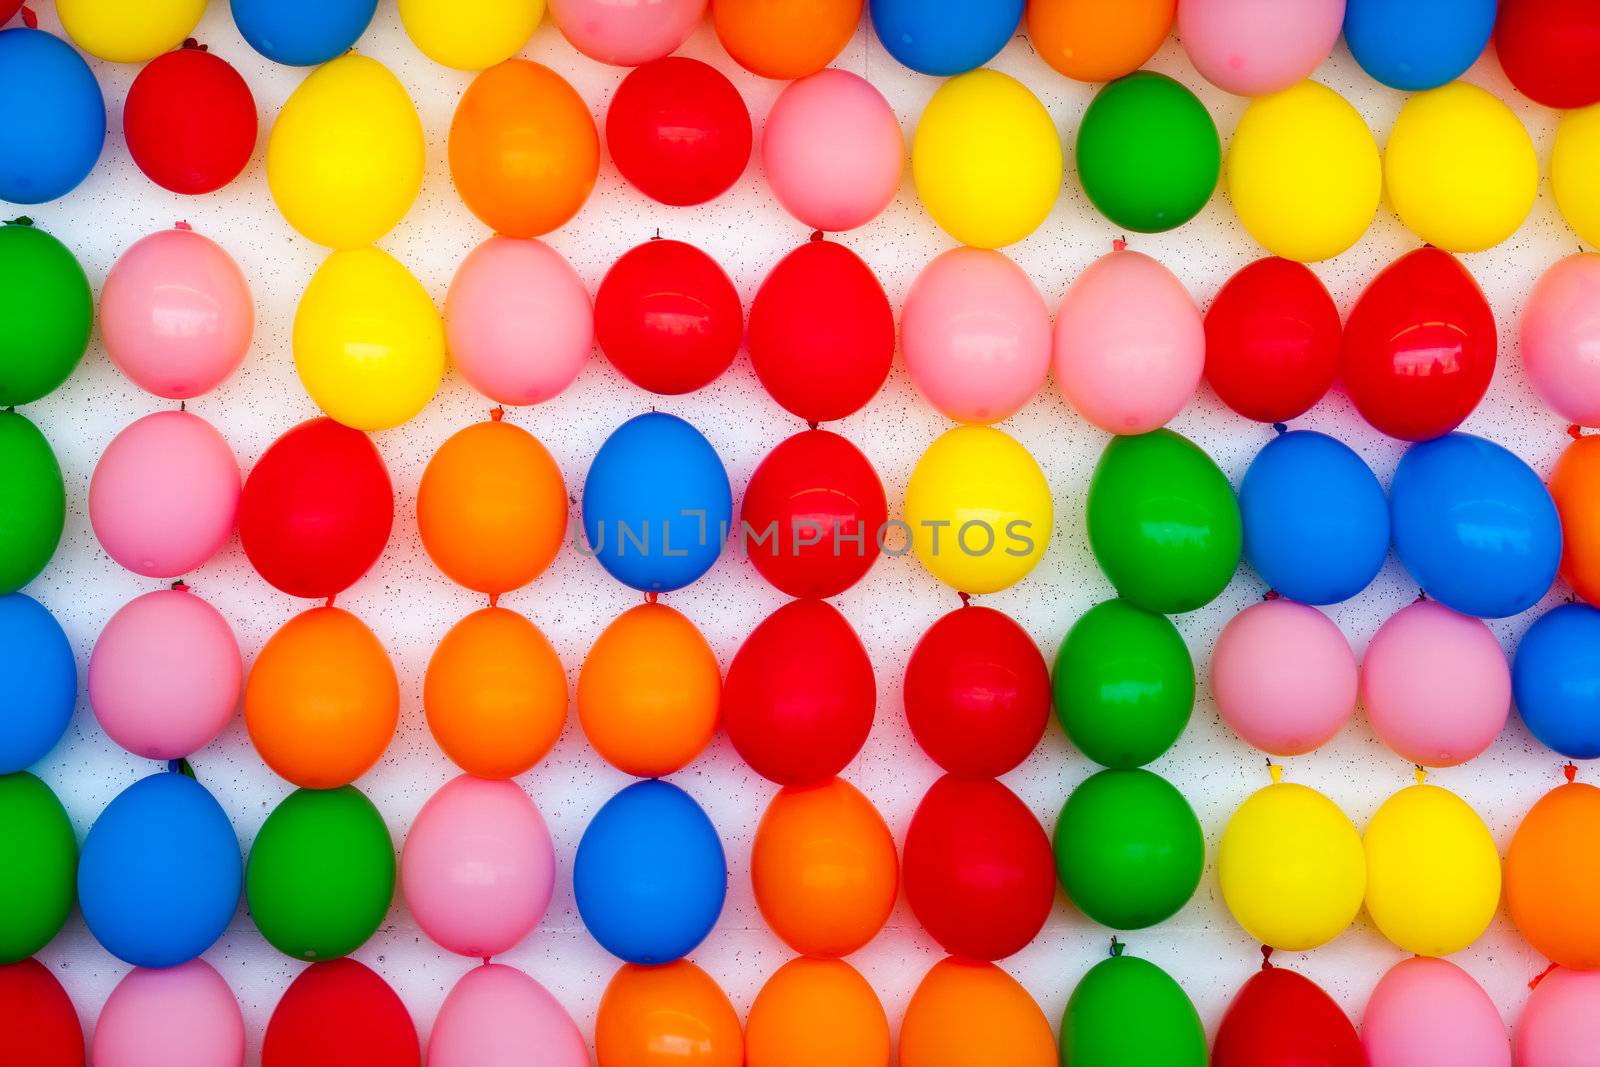 A white wall with colorful balloons attached. Photo is of a boardwalk arcade game where you throw darts and try to pop balloons. Only the wall of balloons is shown.